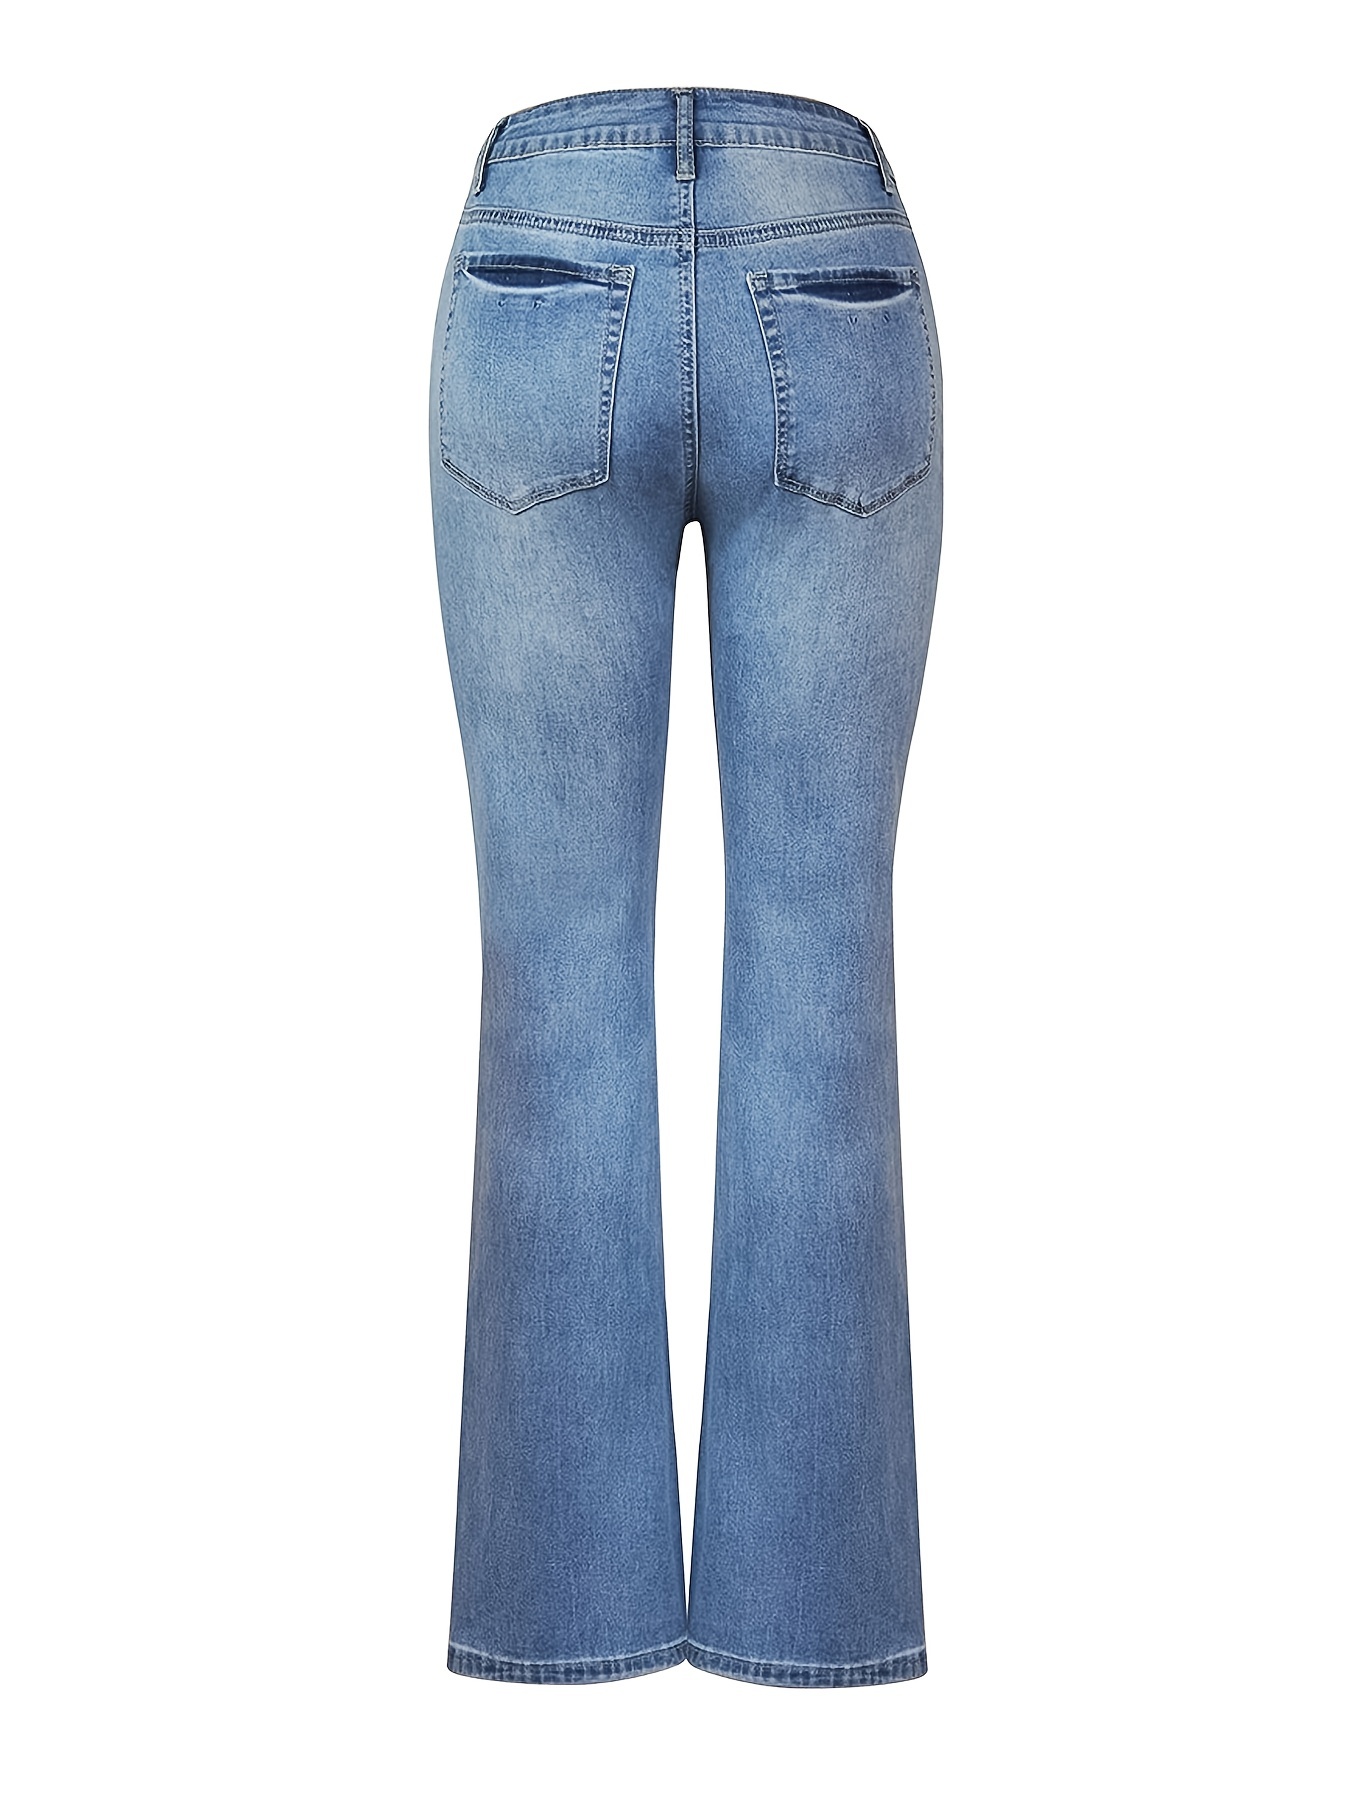 Embossed Crotch Button Bell Bottom Jeans, Stretchy Slim Fitting Slash ...